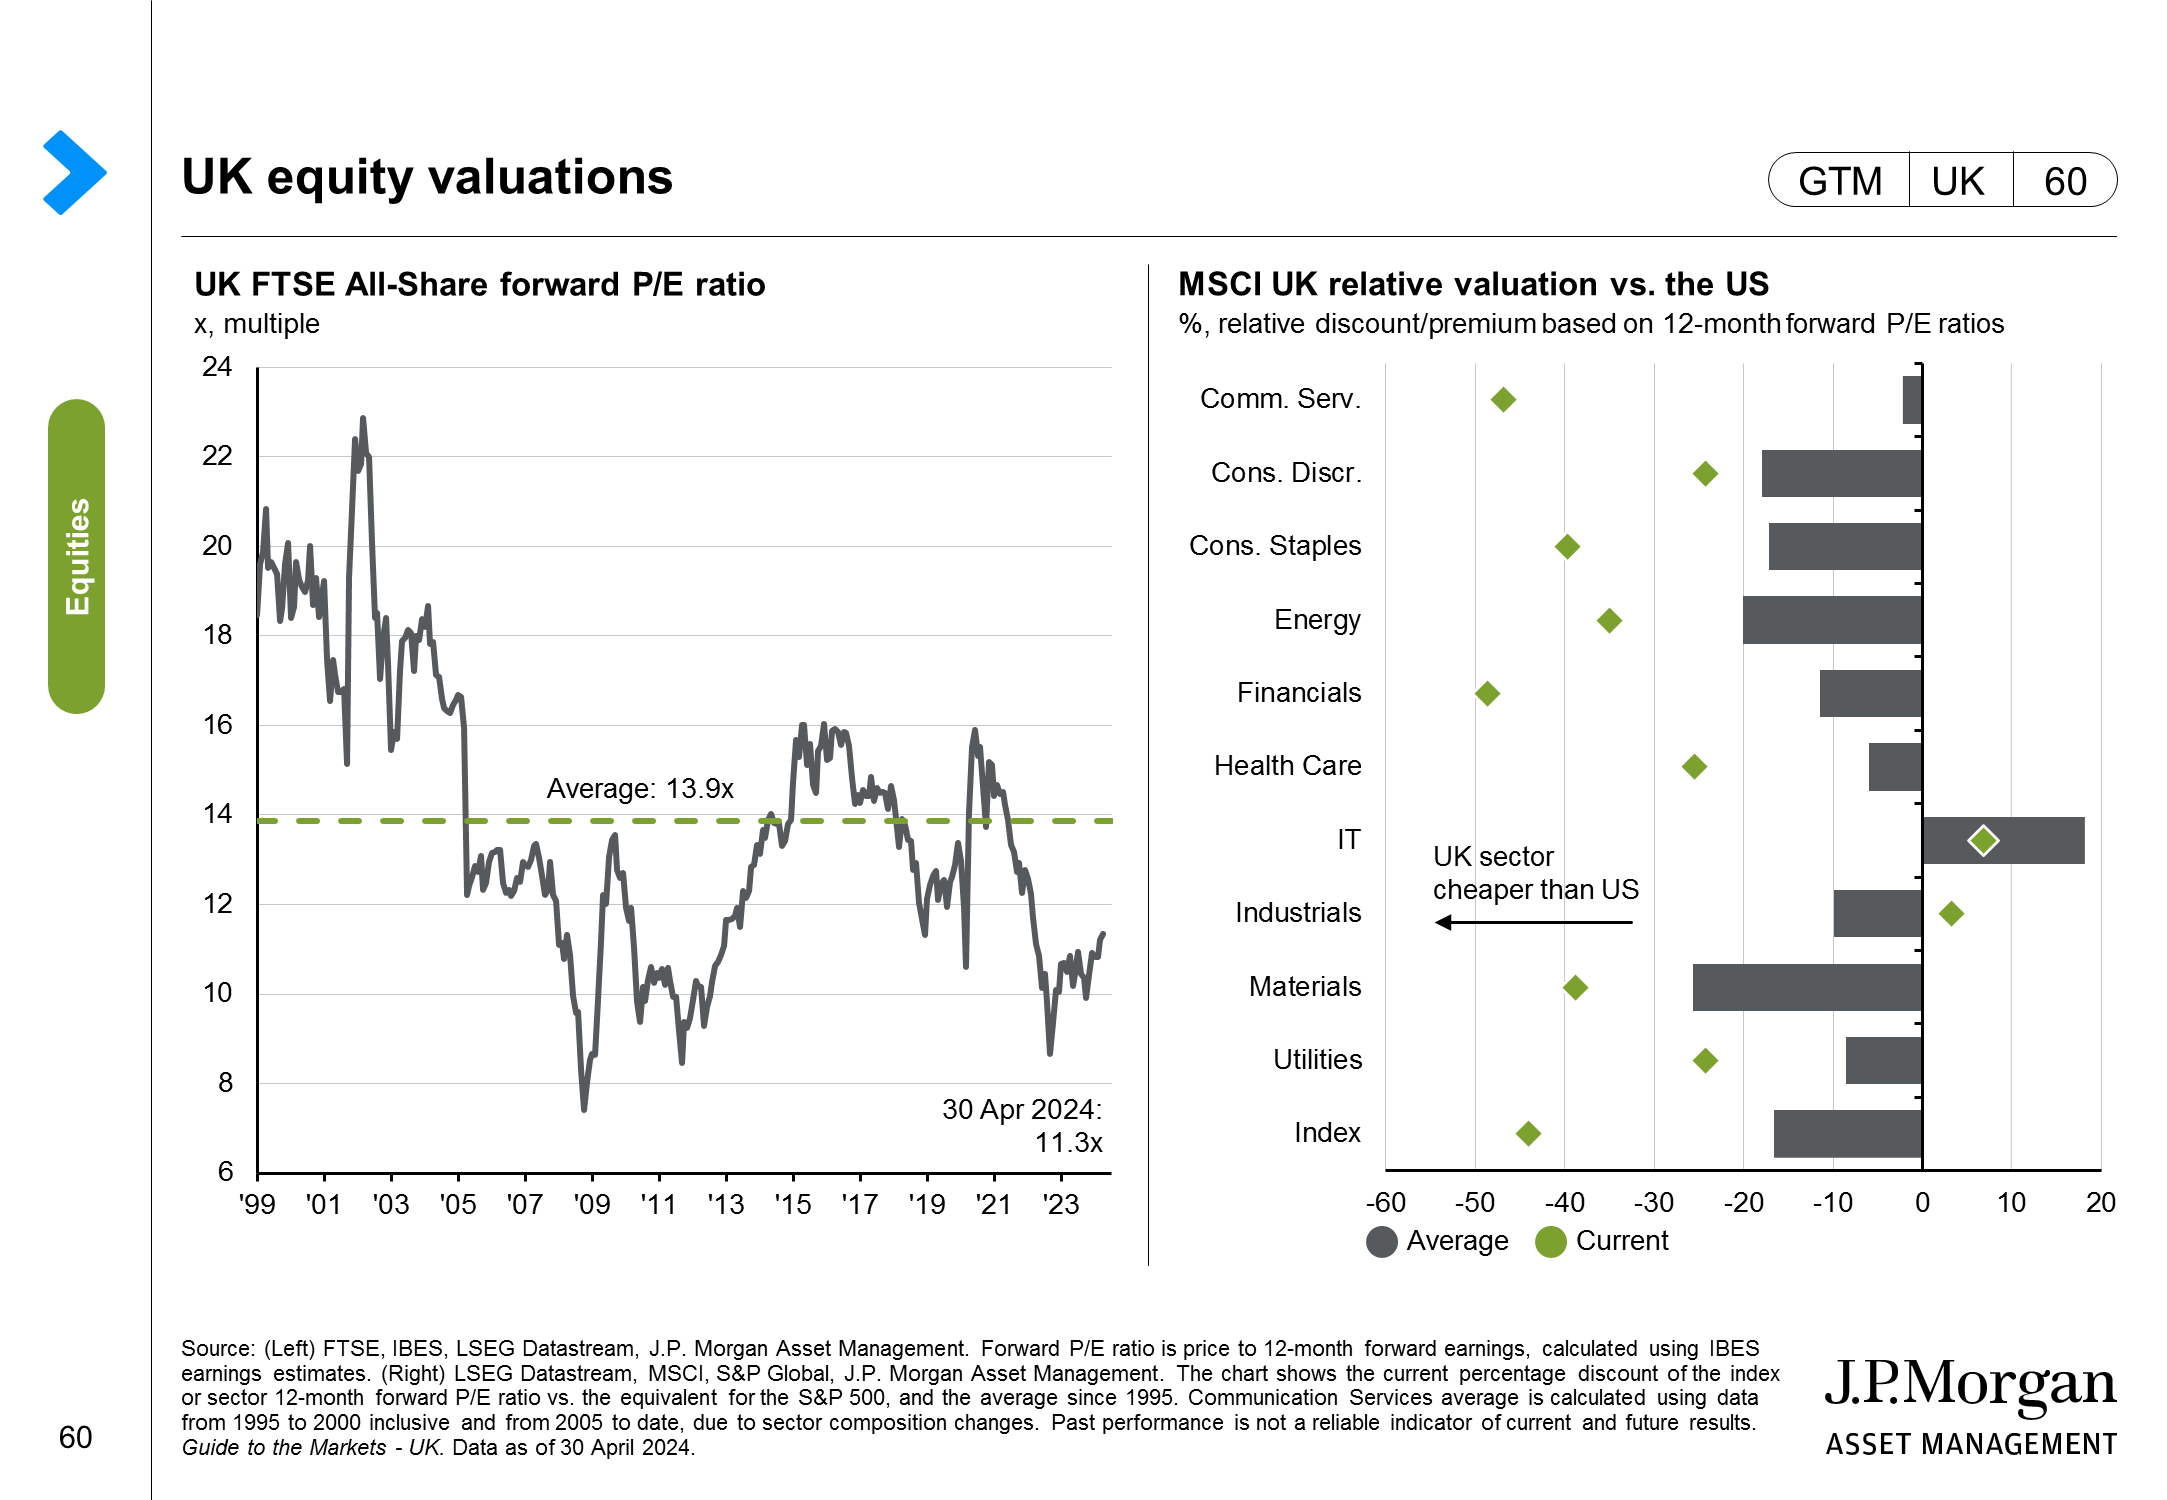 UK equity valuations and performance